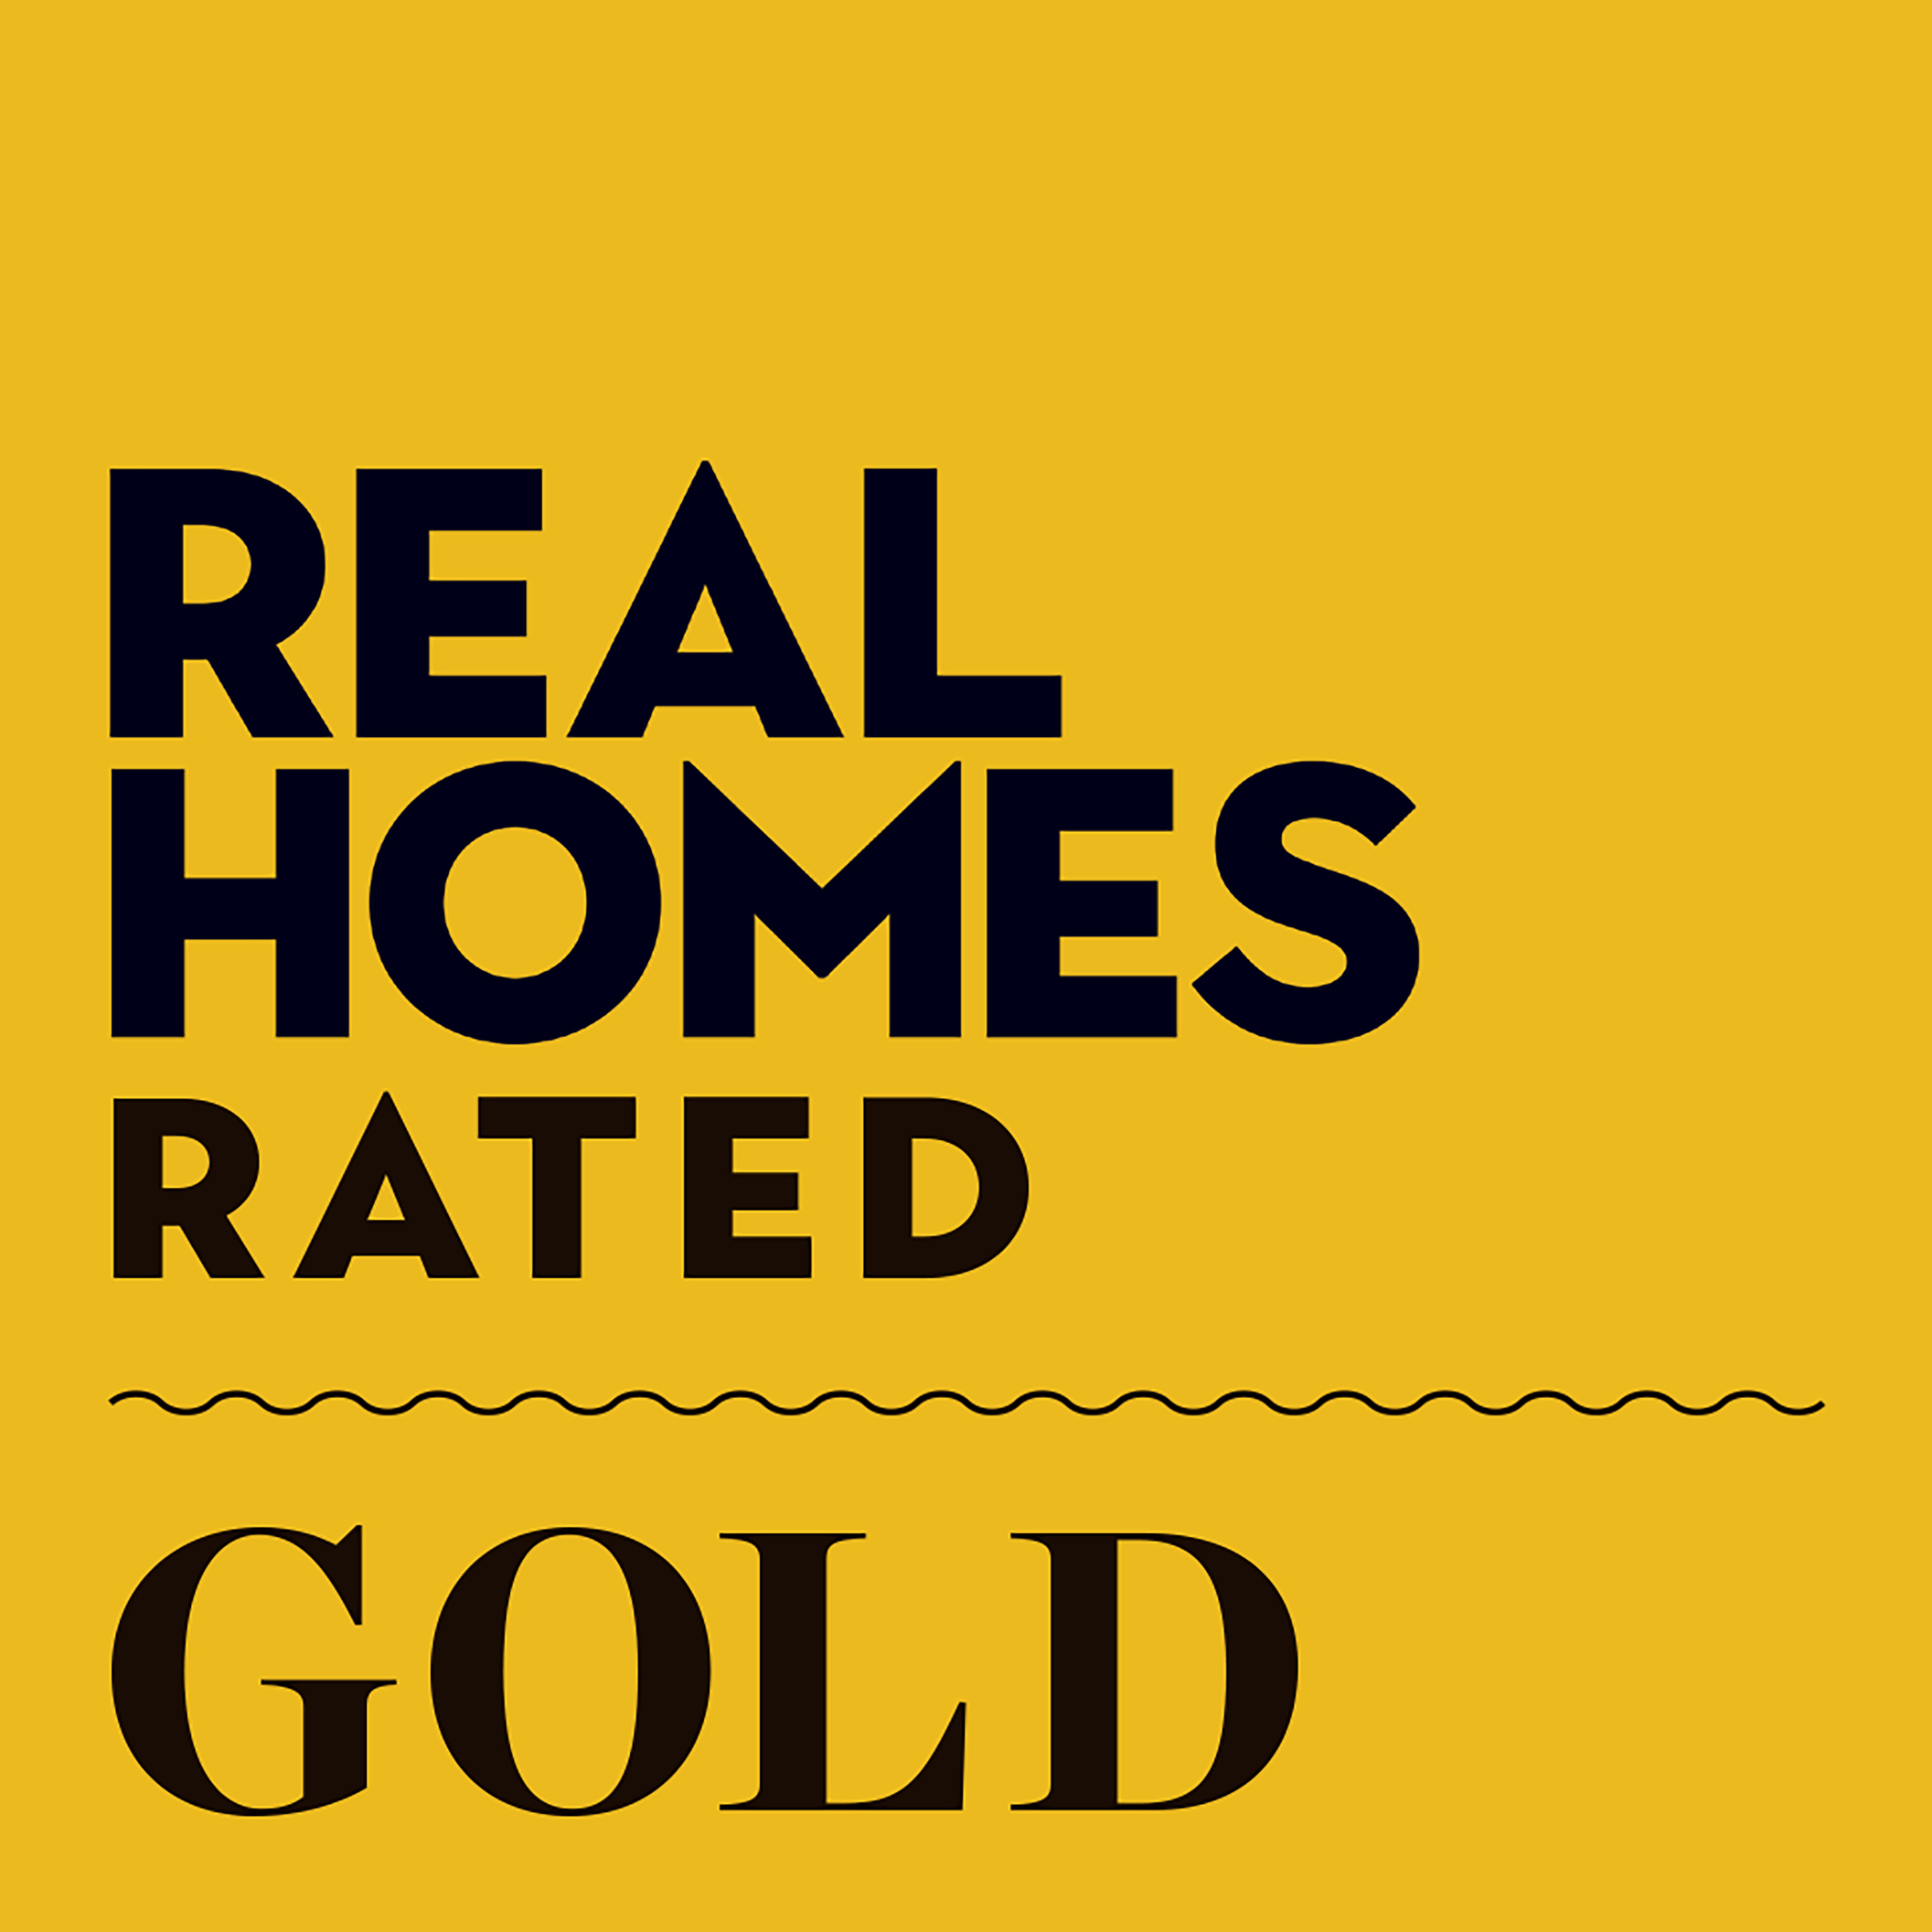 Real Homes Rated Gold badge